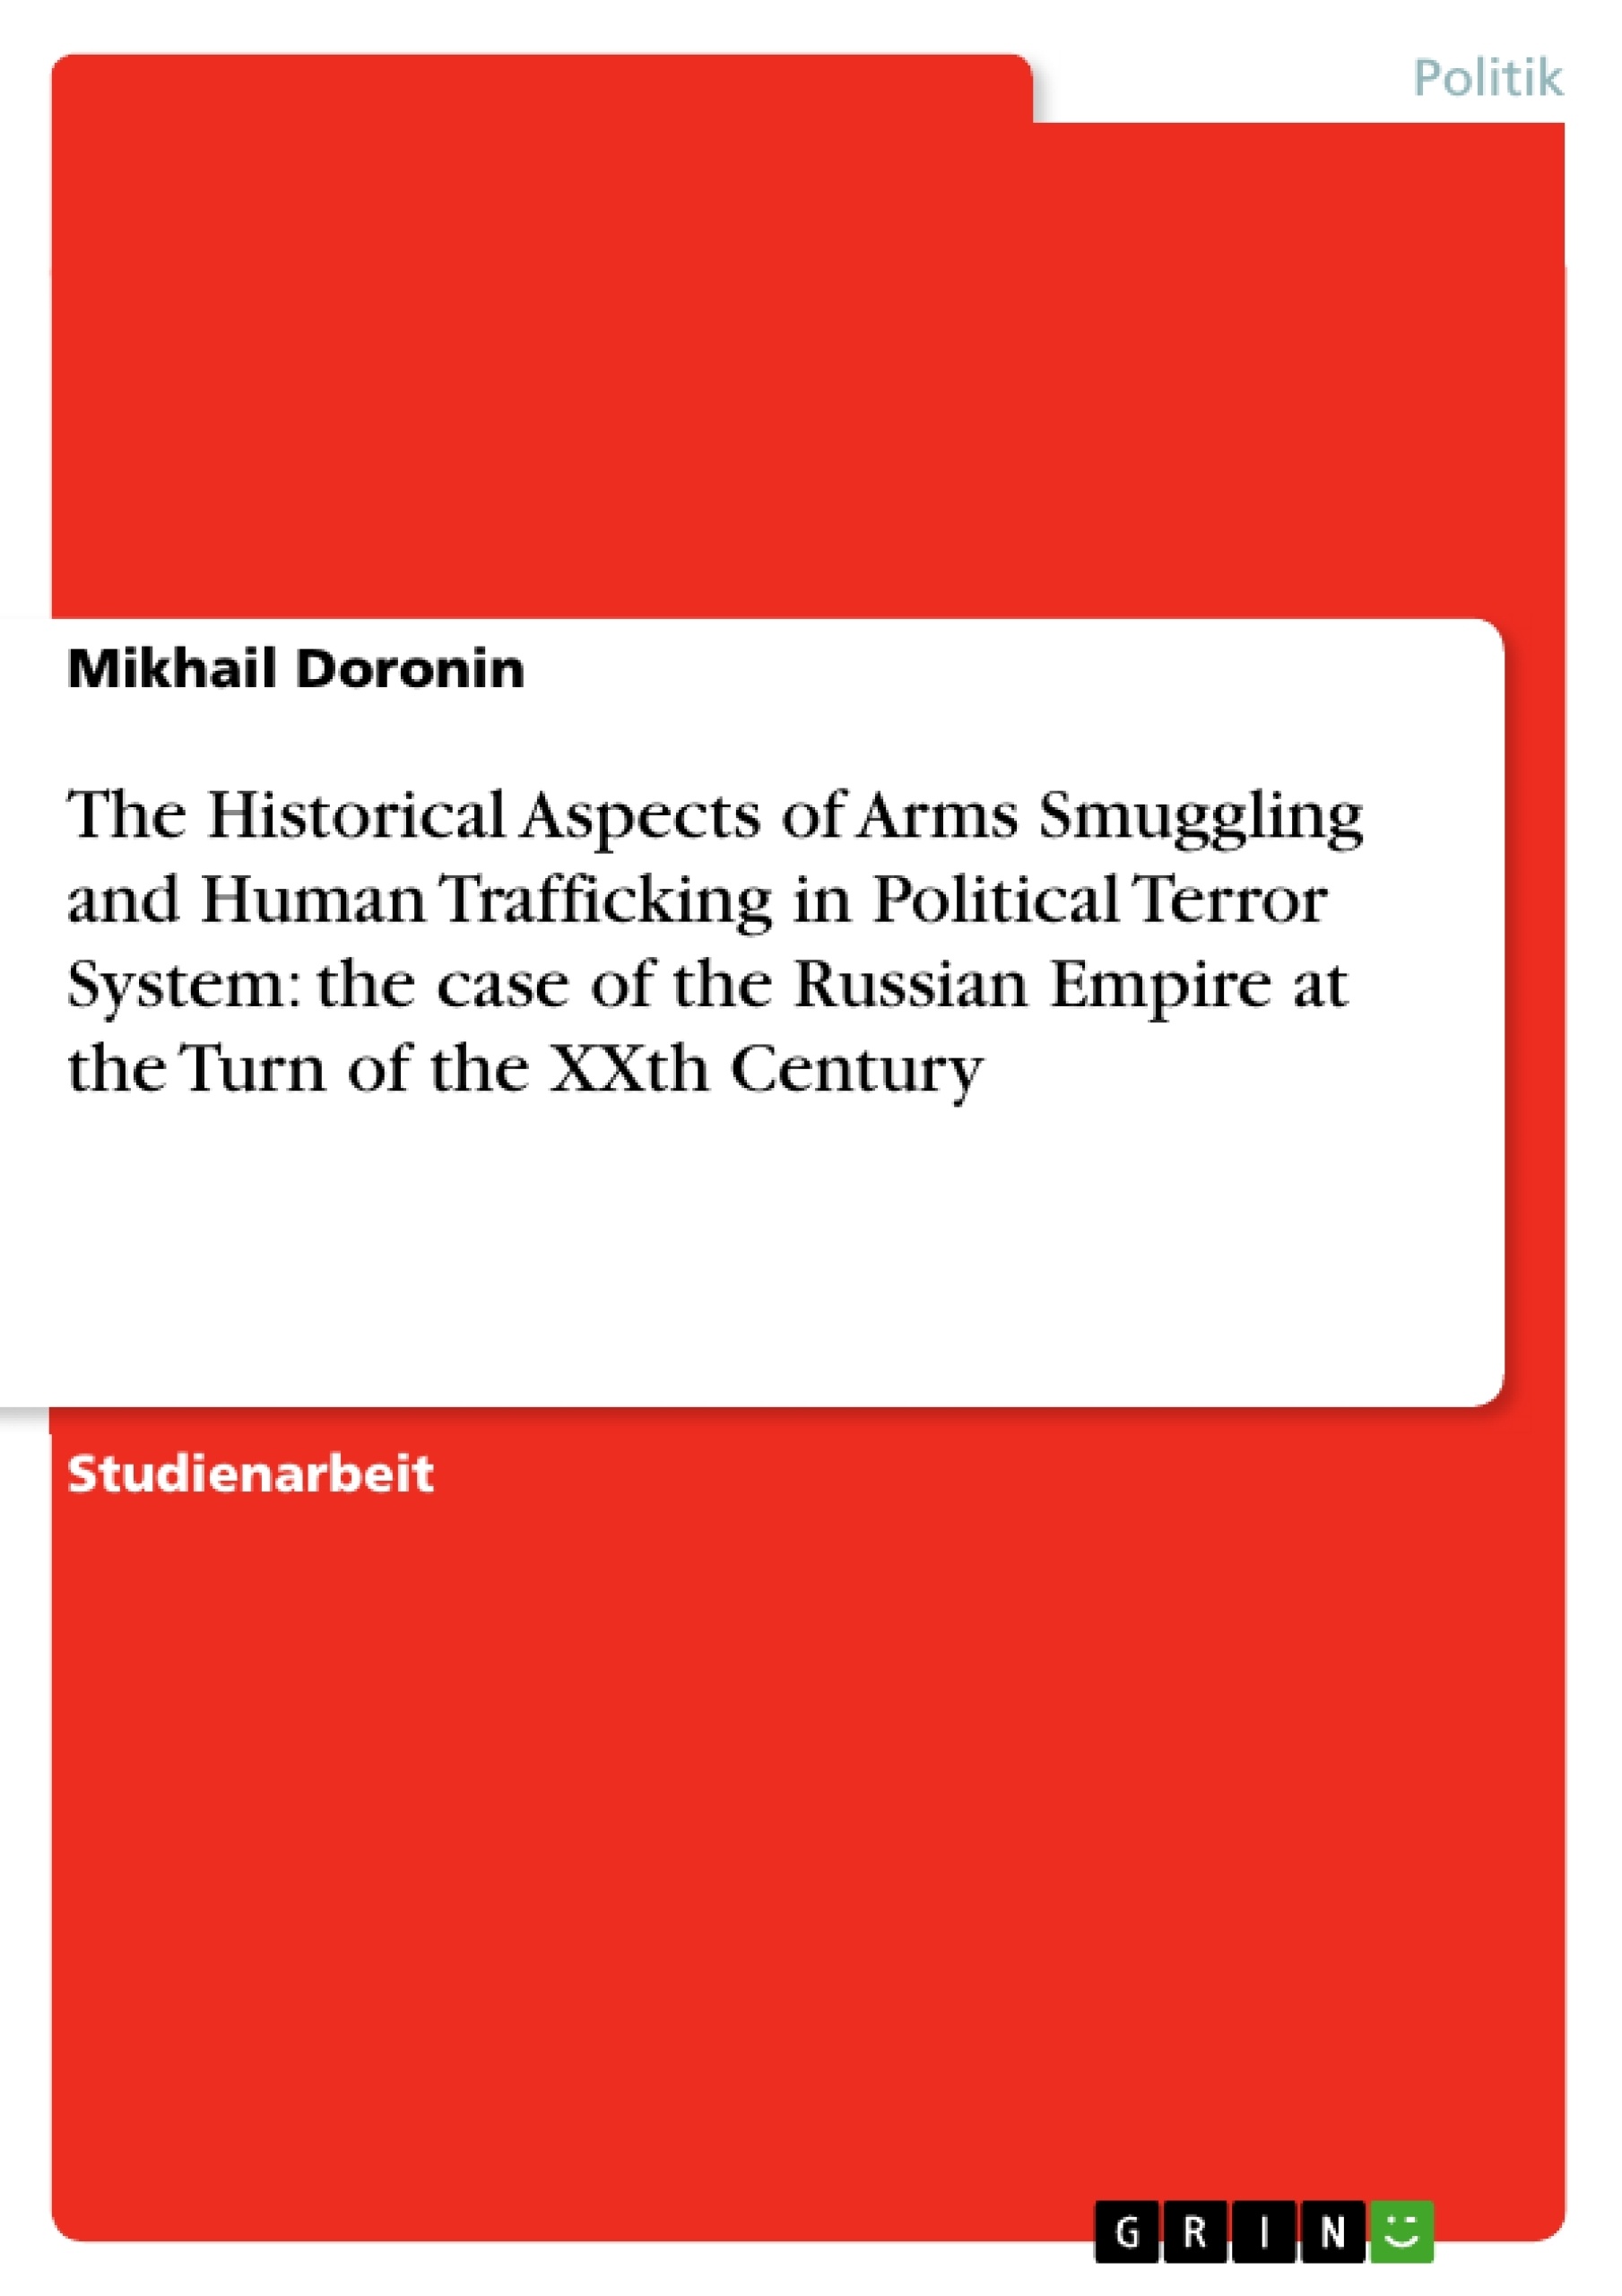 Title: The Historical Aspects of Arms Smuggling and Human Trafficking in Political Terror System: the case of the Russian Empire at the Turn of the XXth Century 